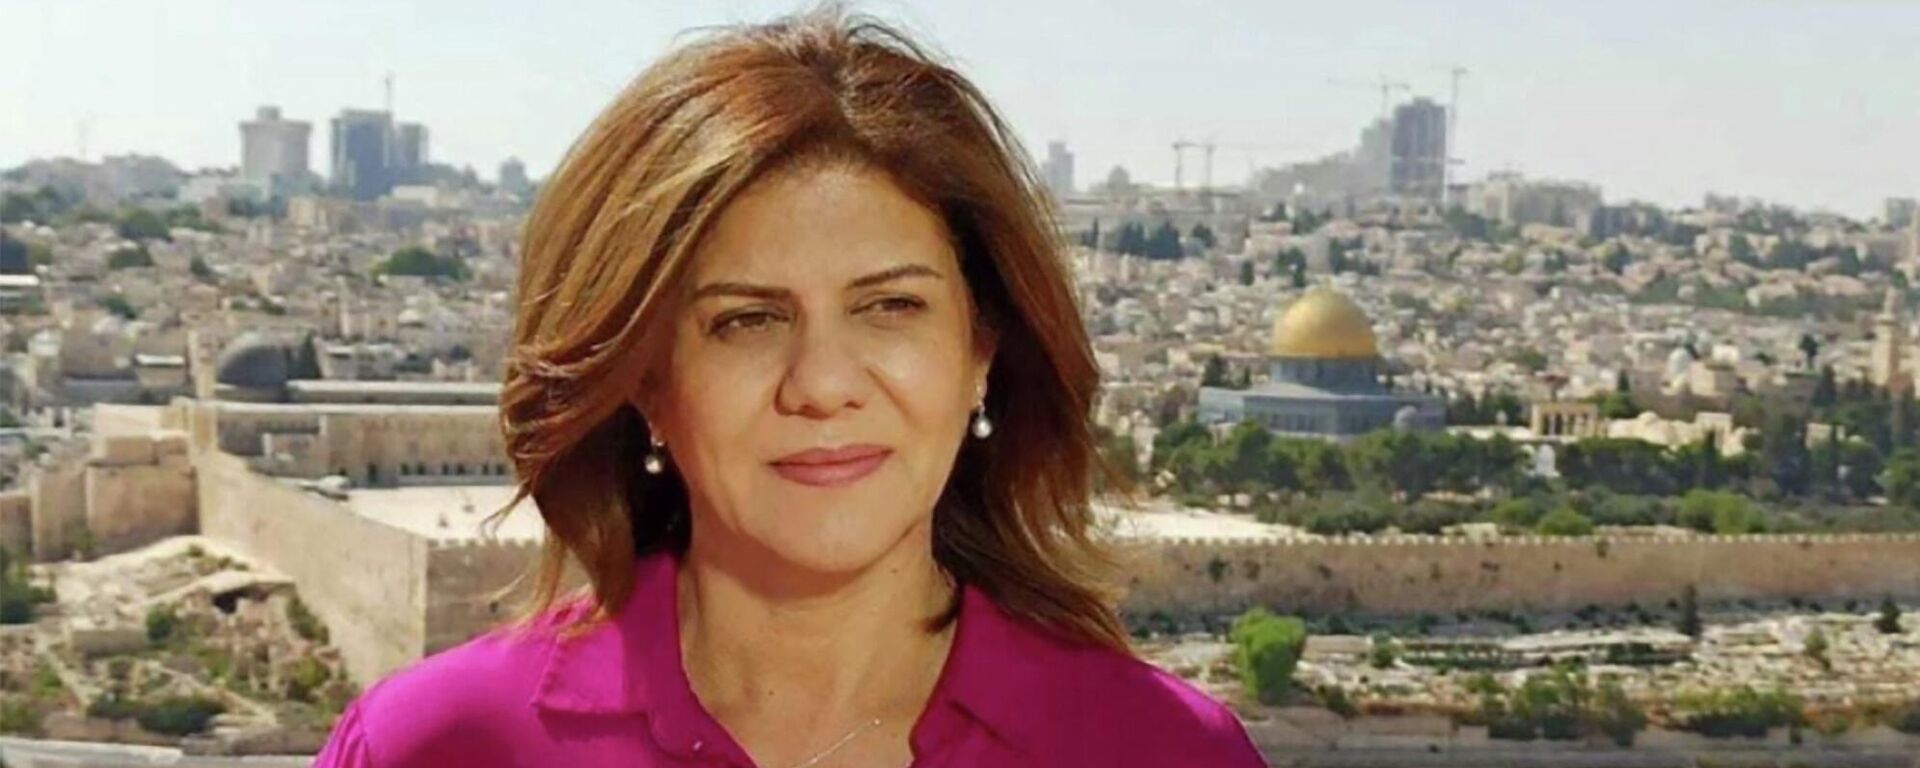 An undated handout photo released by the Doha-based Al-Jazeera TV shows the channel's veteran journalist Shireen Abu Aqleh (Akleh) during one of her reports from Jerusalem. - Sputnik International, 1920, 26.05.2022